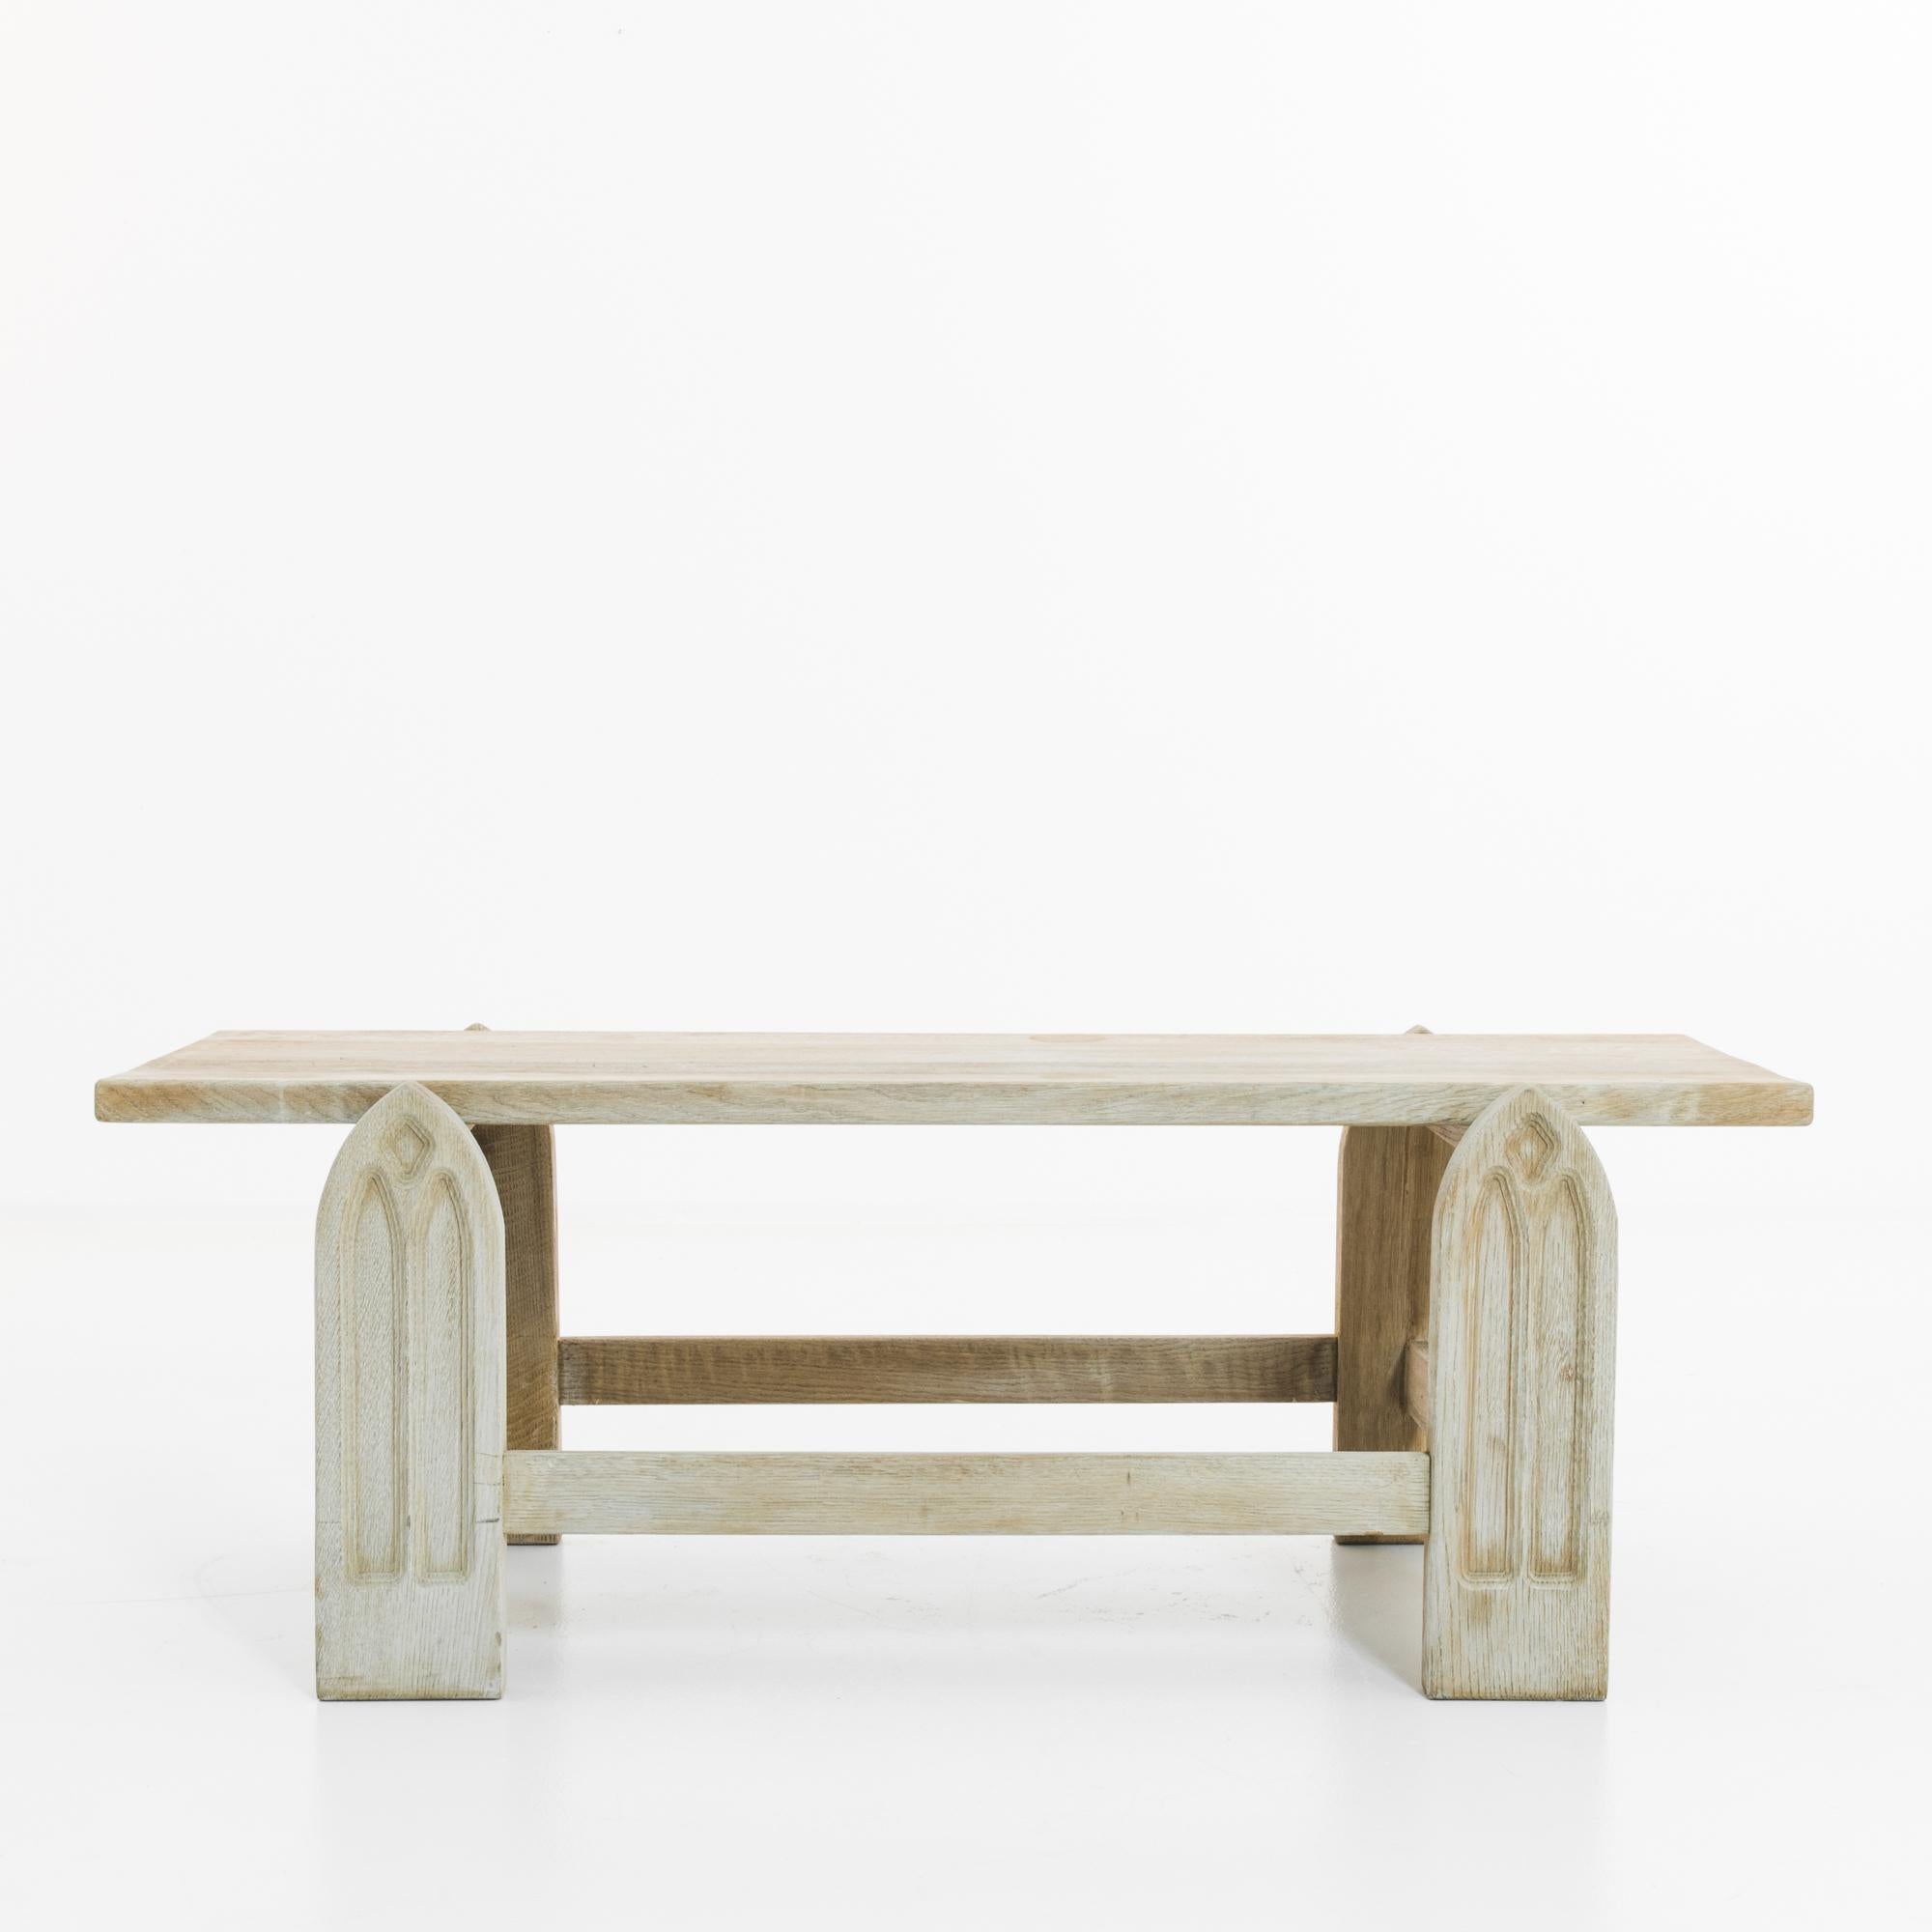 A bleached oak coffee table from Belgium, produced circa 1960. A charming 18